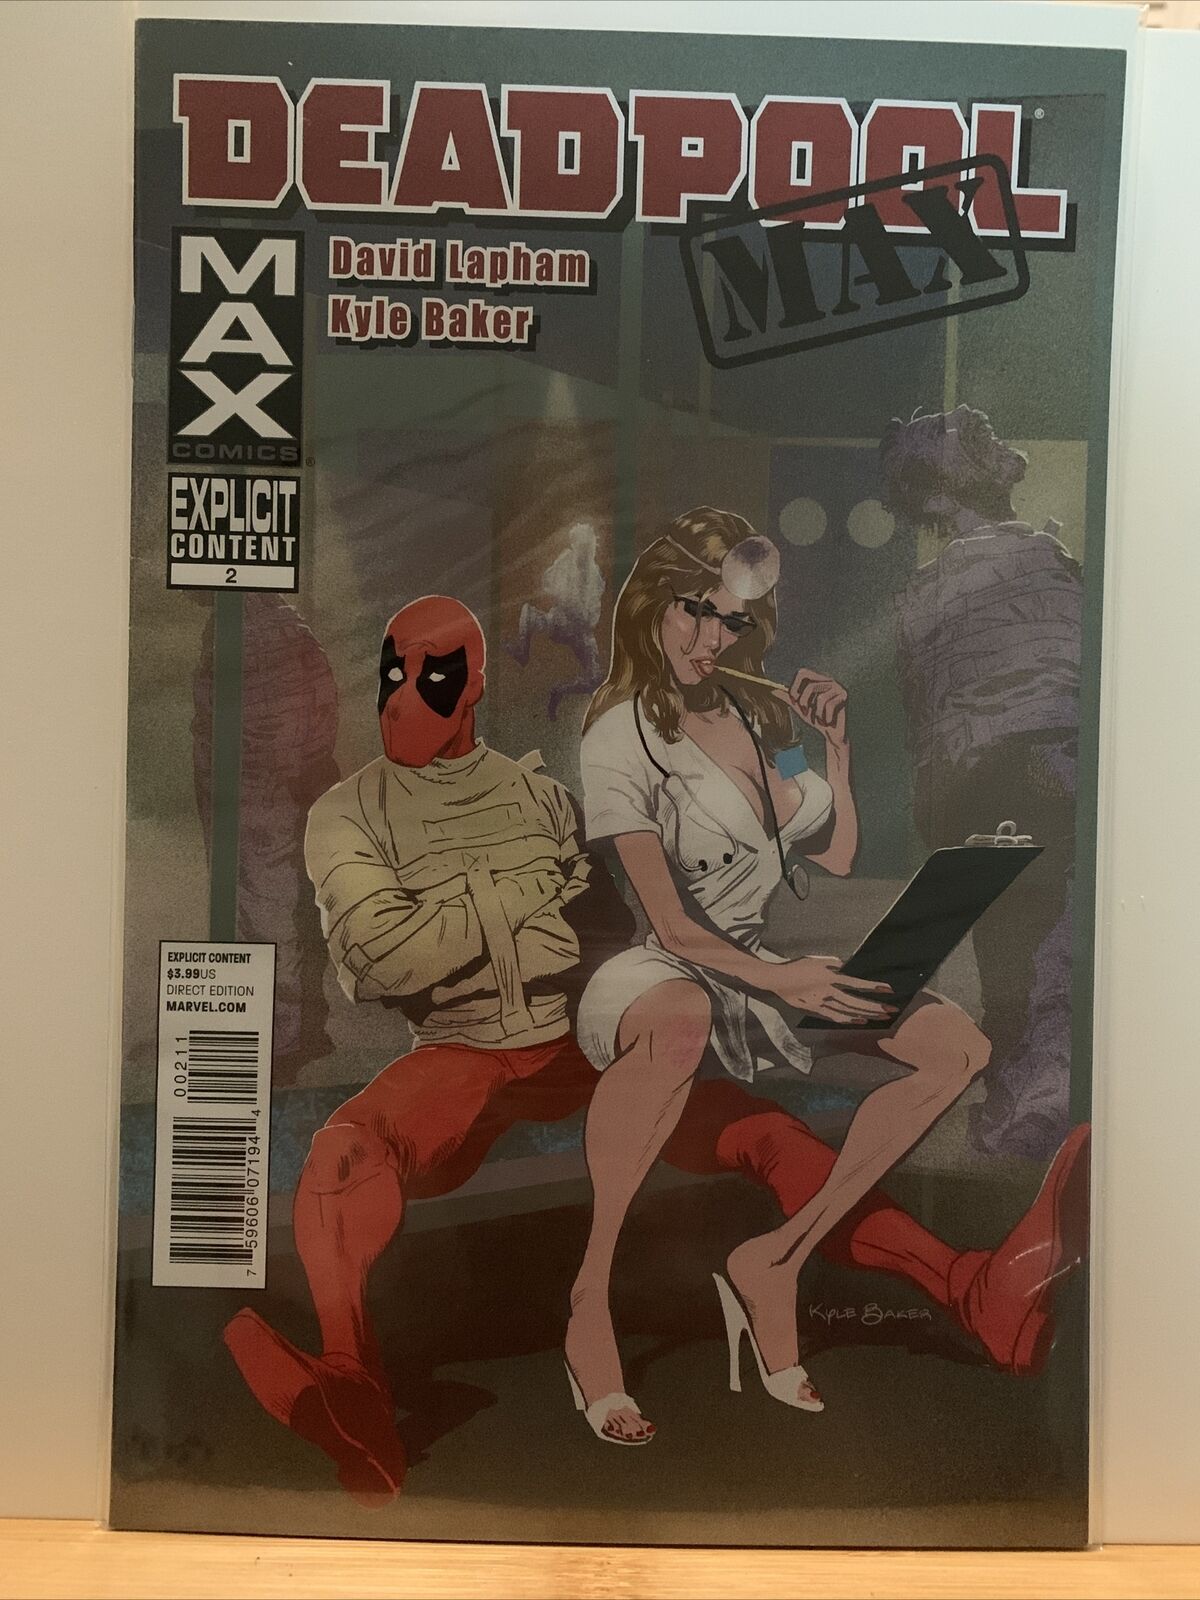 Max Comics: Deadpool MAX #2 NM First Print David Lapham Cover by Kyle Baker